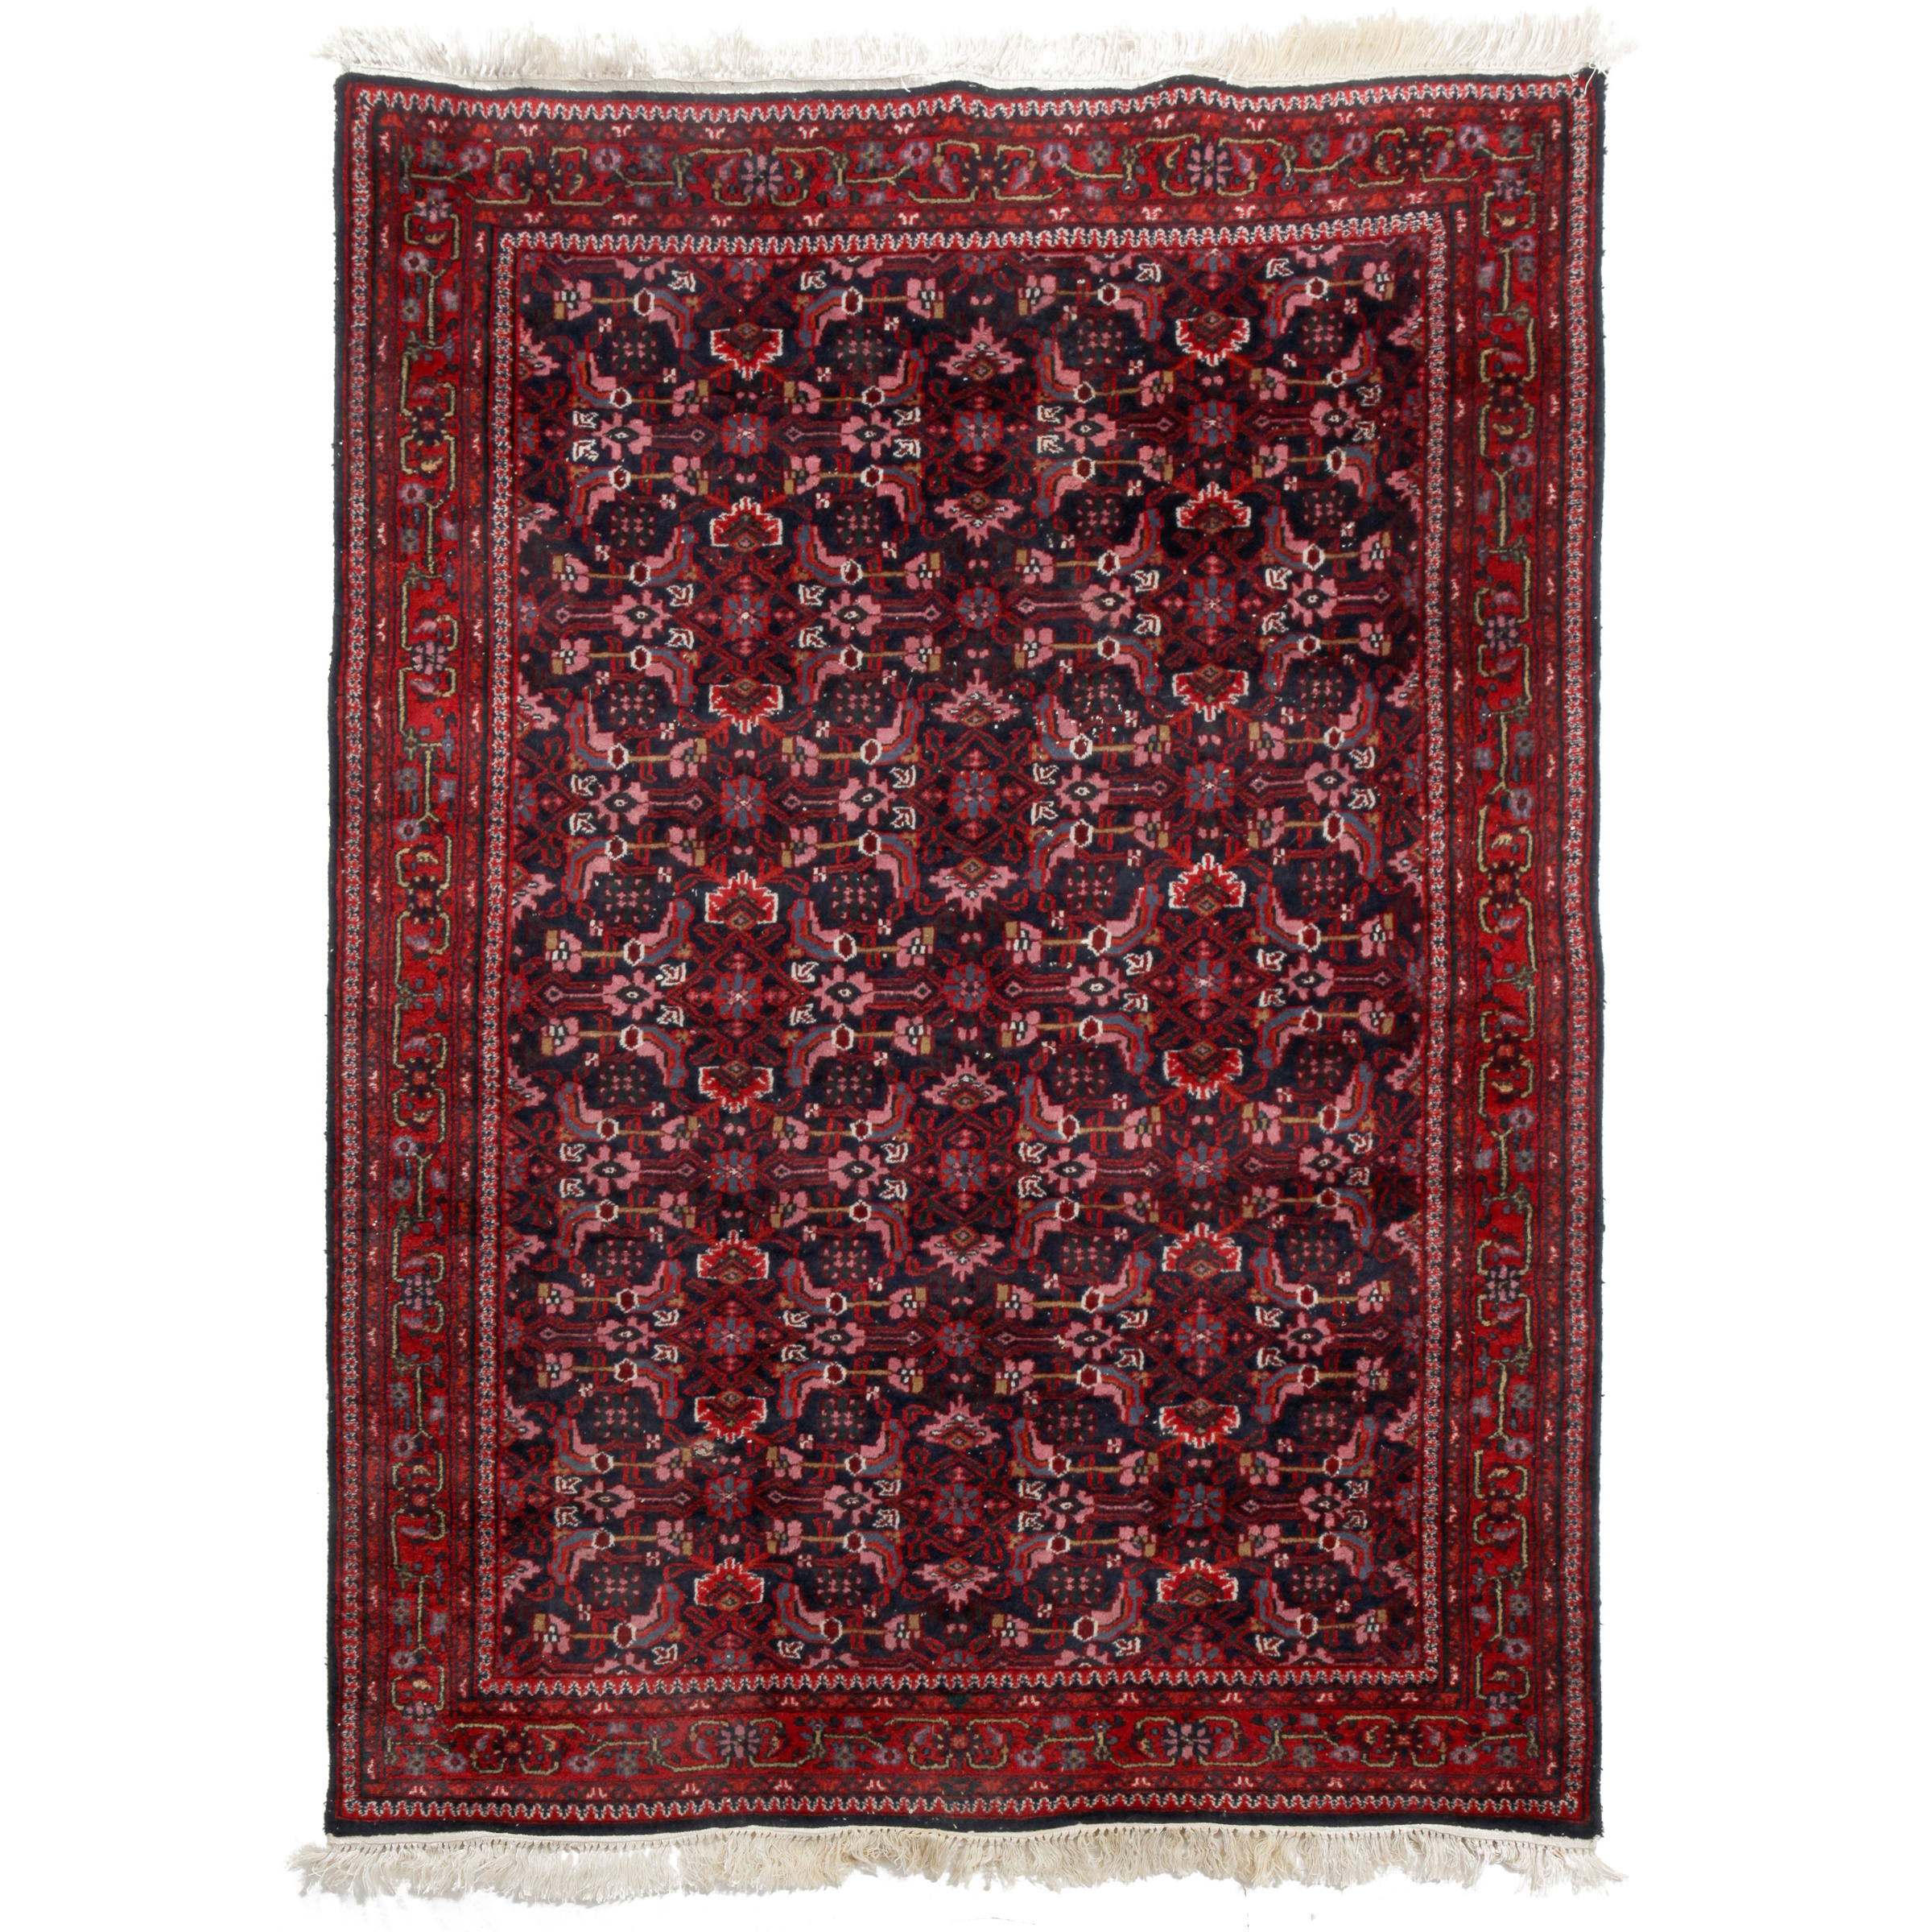 Feraghan Rug, mid to late 20th century